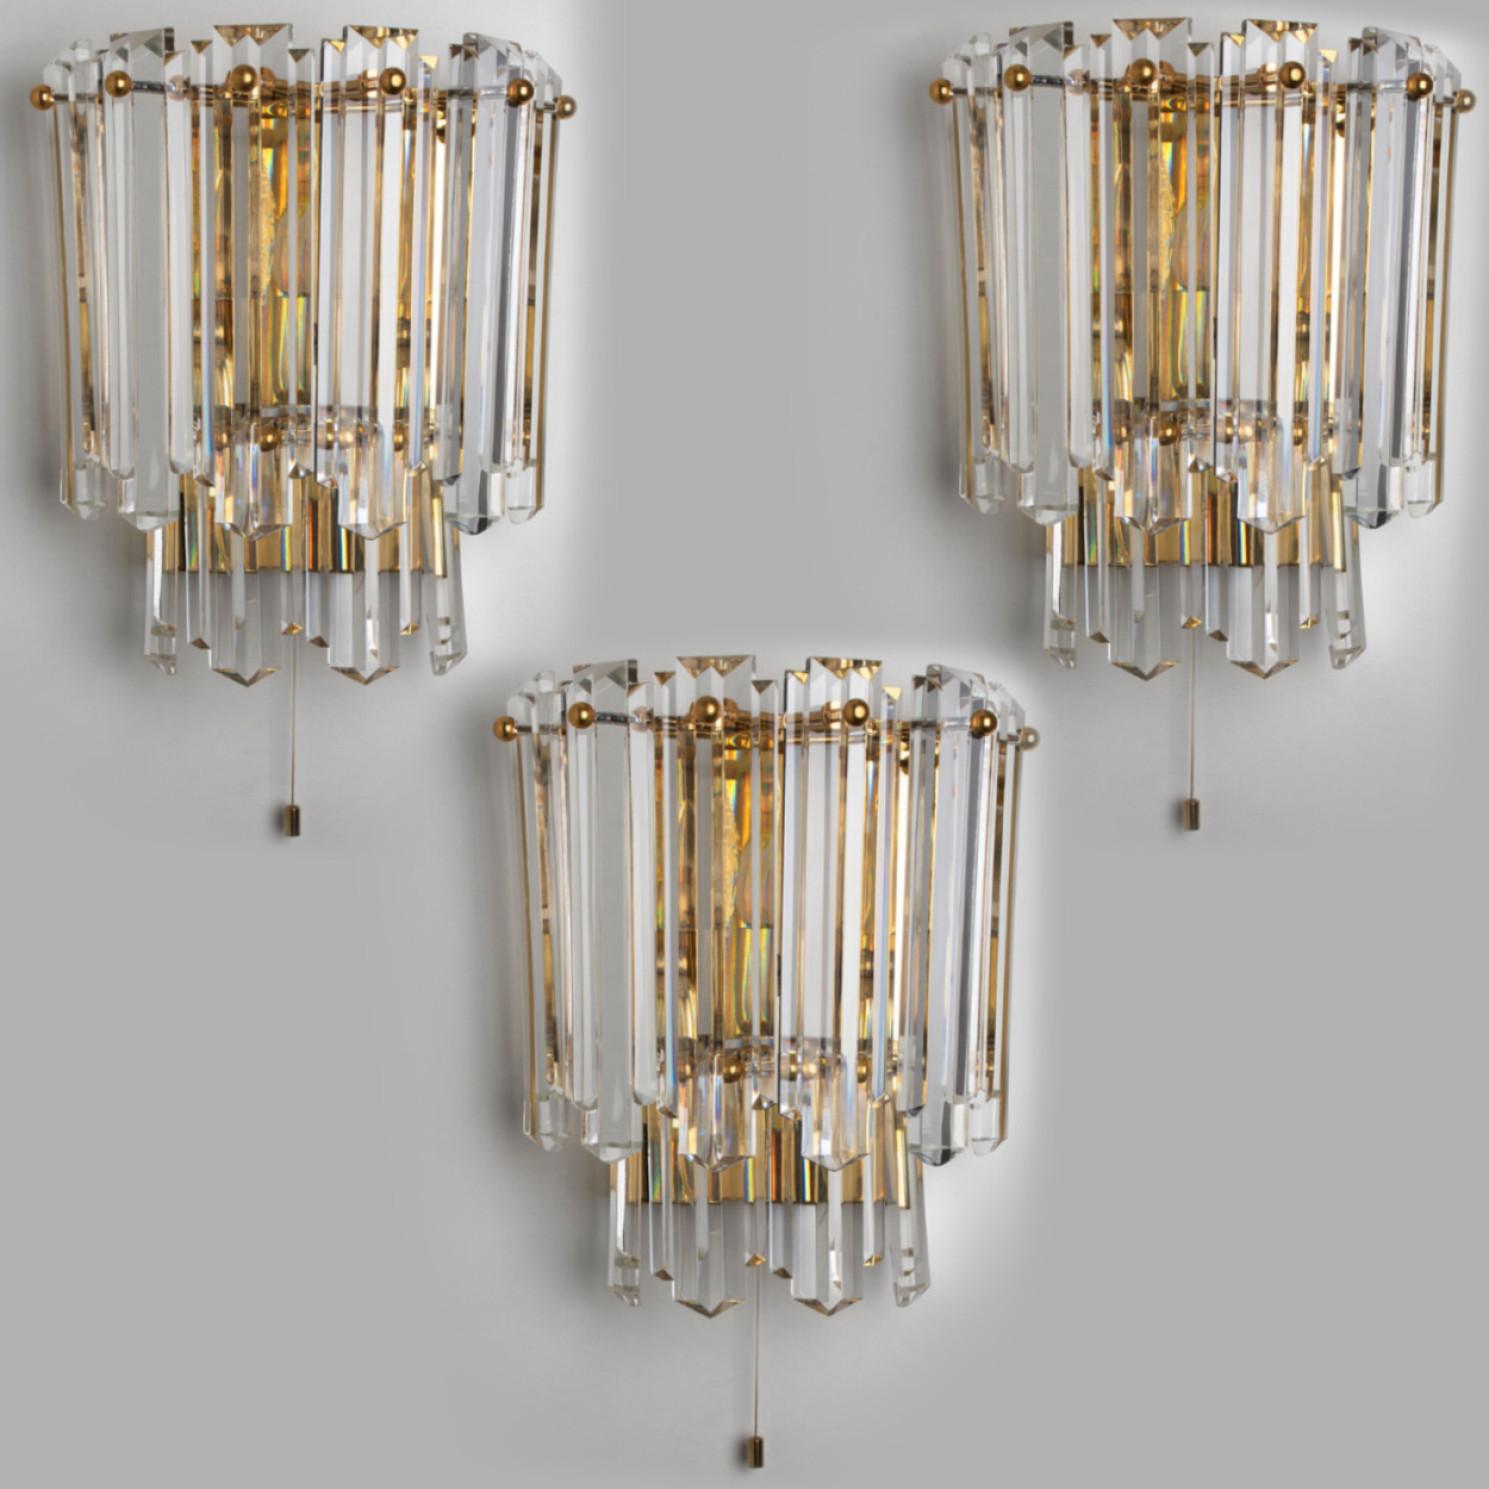 High-end wall sconce featuring wonderful faceted crystal clear glass 